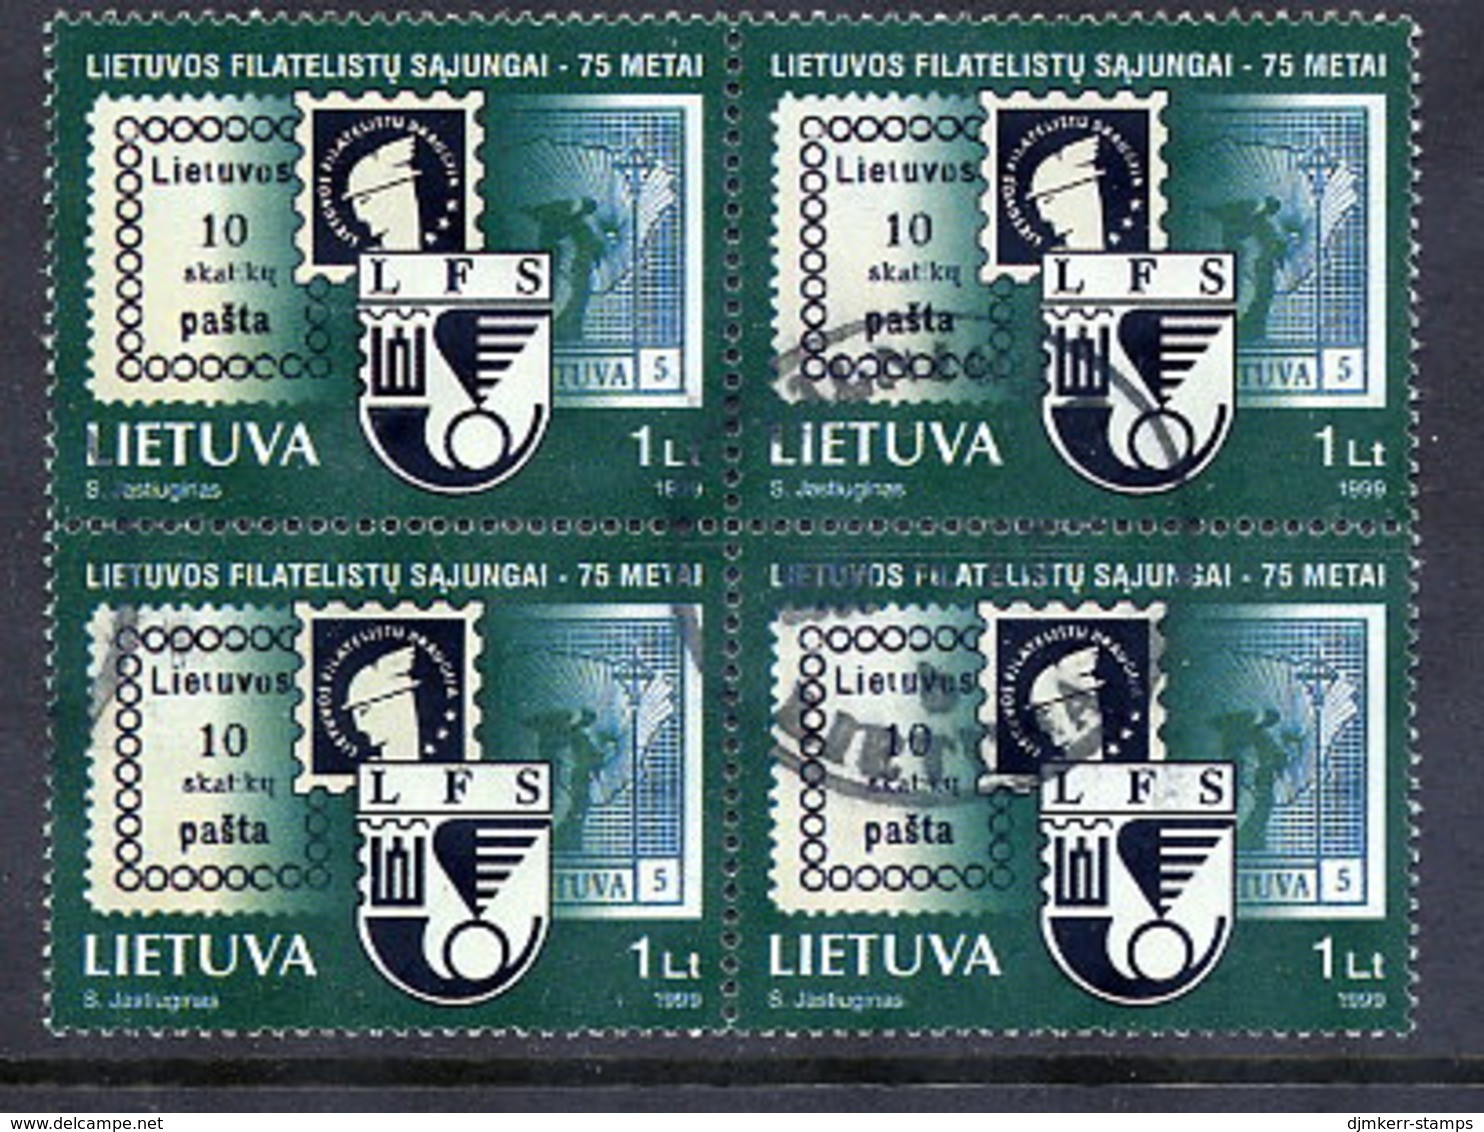 LITHUANIA 1999 Philatelists Association, Used Block Of 4.  Michel 701 - Lithuania